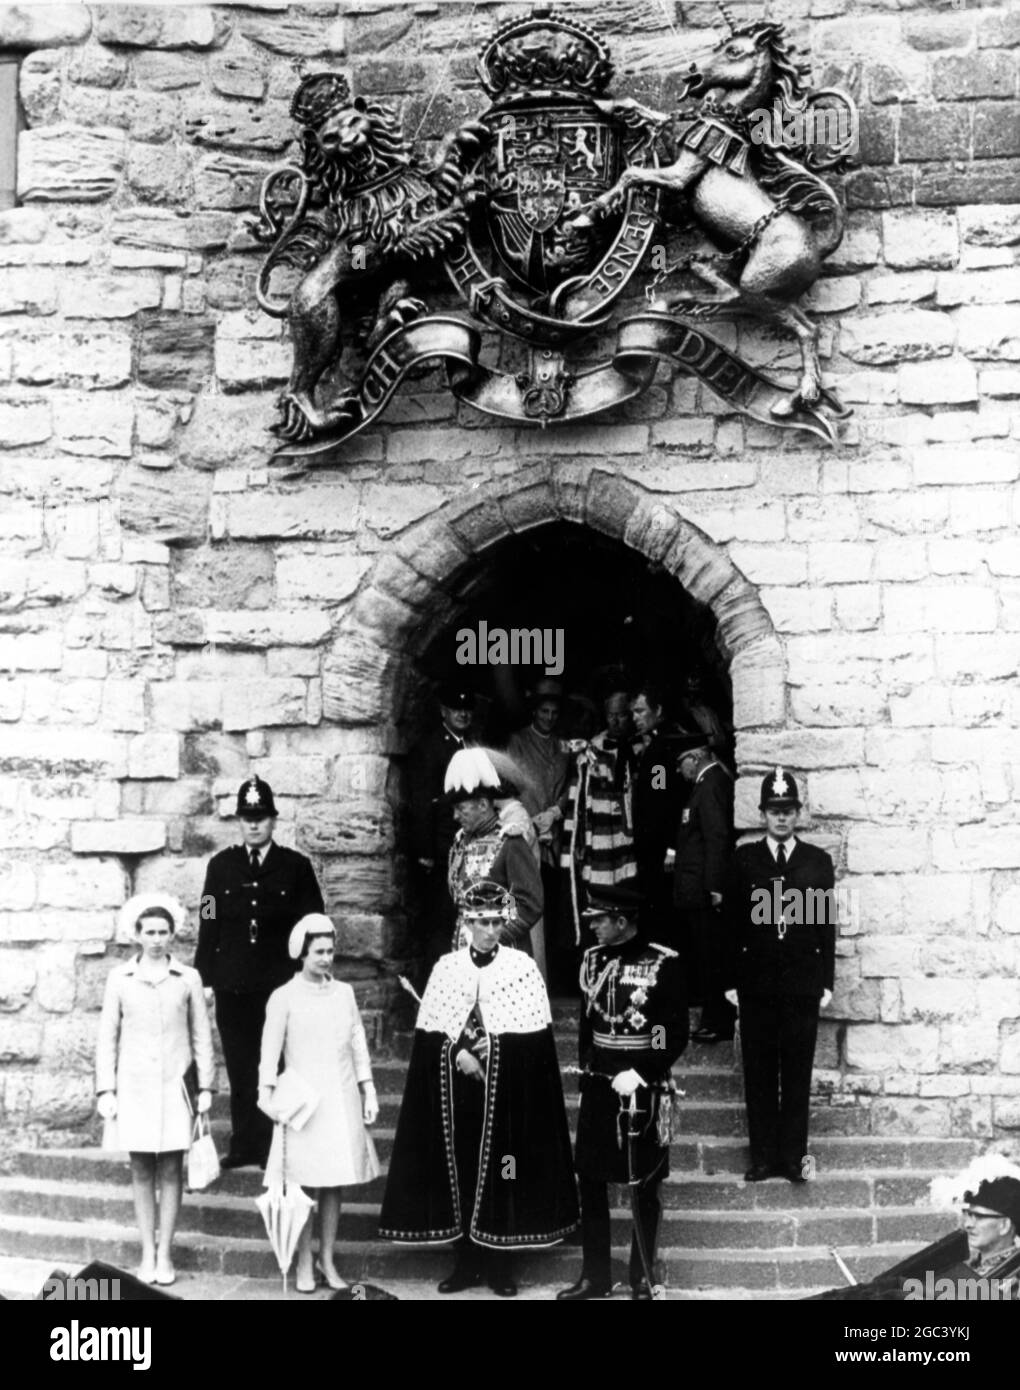 The ceremony over Prince Charles , the newly invested Prince of Wales faces his people once again ... as he leaves Watergate , one of the entrances to the ancient Caernarvon Castle . The 20 year old Prince is accompanied by his father Prince Philip , his mother Queen Elizabeth II who performed the investitude ceremony , and his sister , Princess Anne . They are followed by Lord Snowdon ( background right ) and the silver haired Duke of Norfolk , chief organiser of this historic , colourful event which has not taken place since 1911 when the present Duke of Windsor became Prince of Wales . 1 Ju Stock Photo